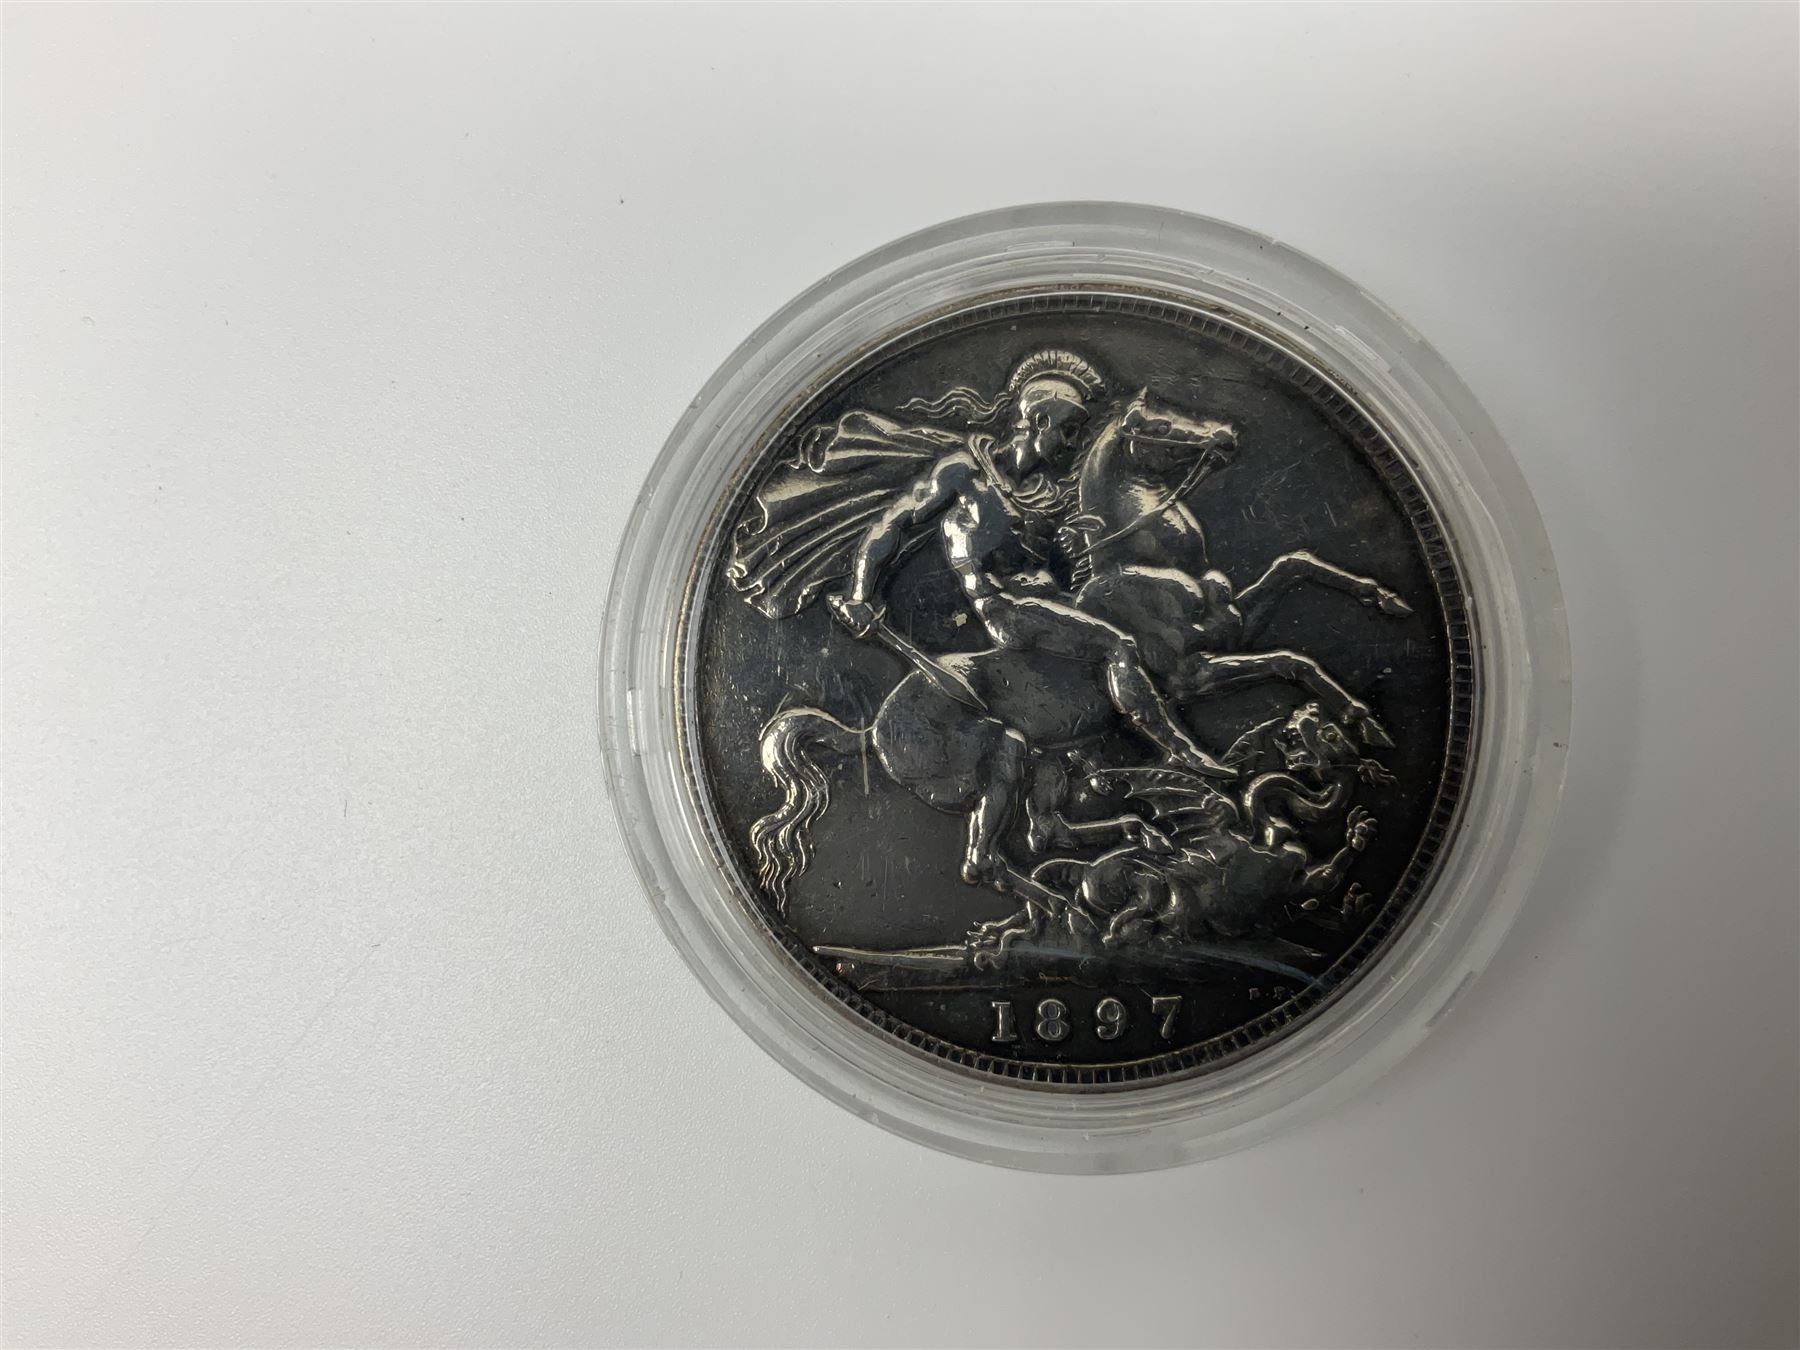 Queen Victoria 1897 crown coin - Image 3 of 7